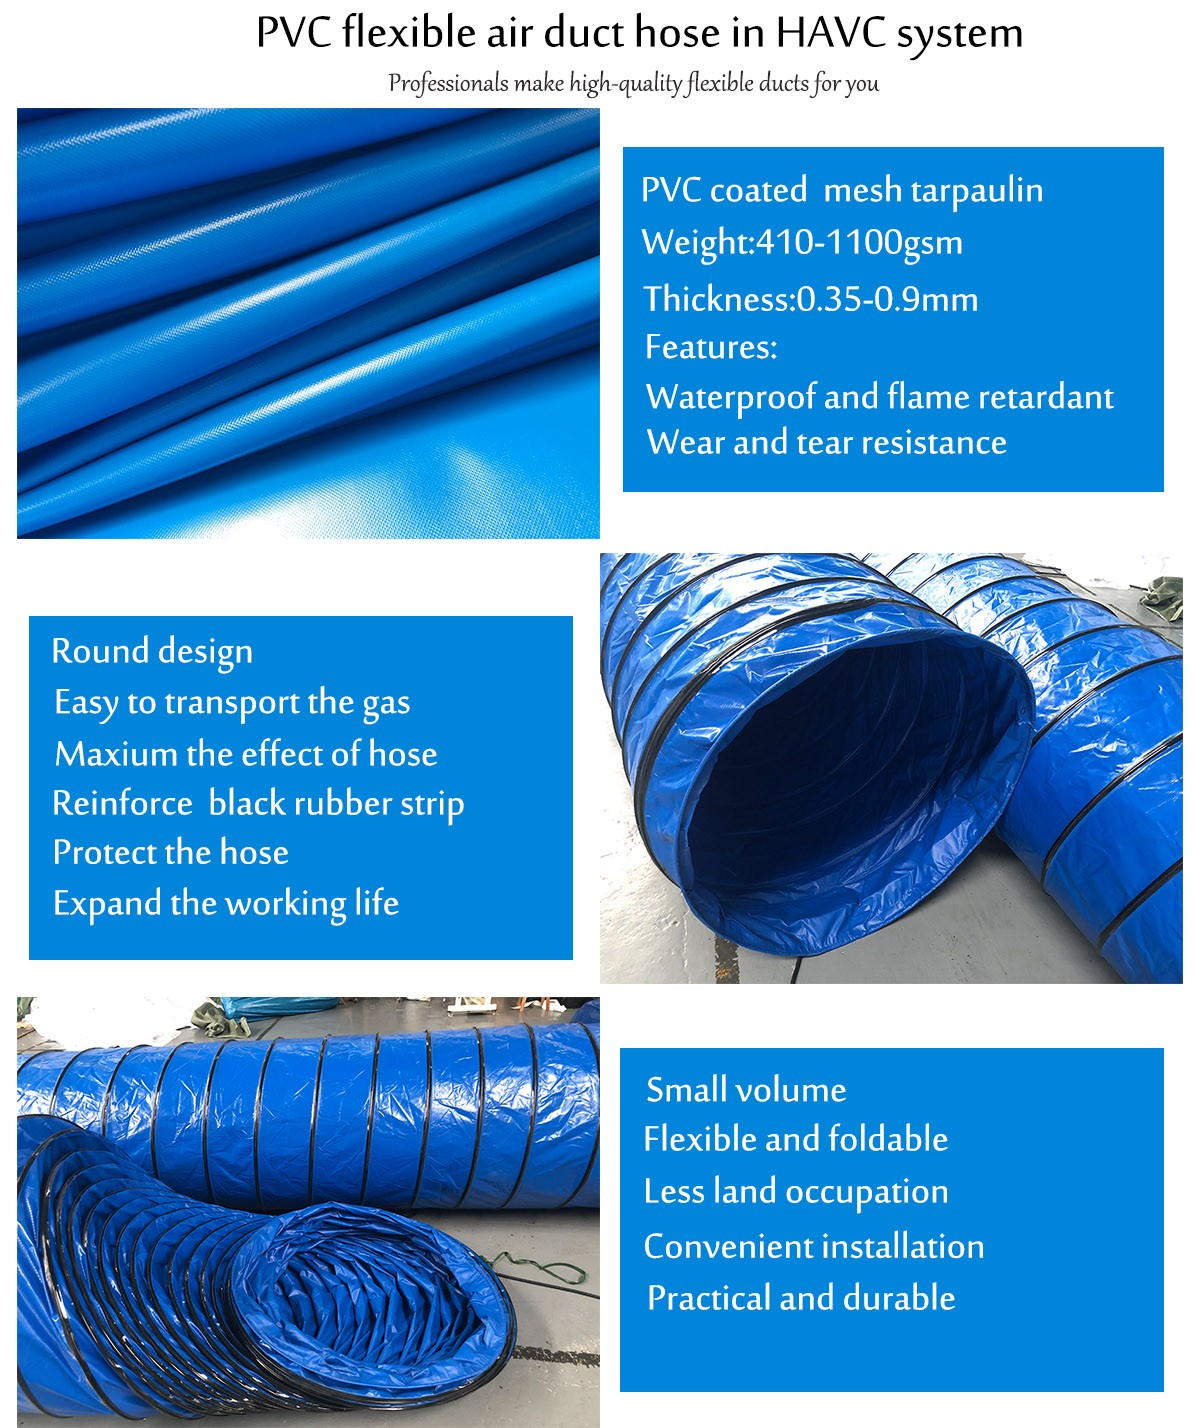 PVC flexible air duct hose in HAVC system